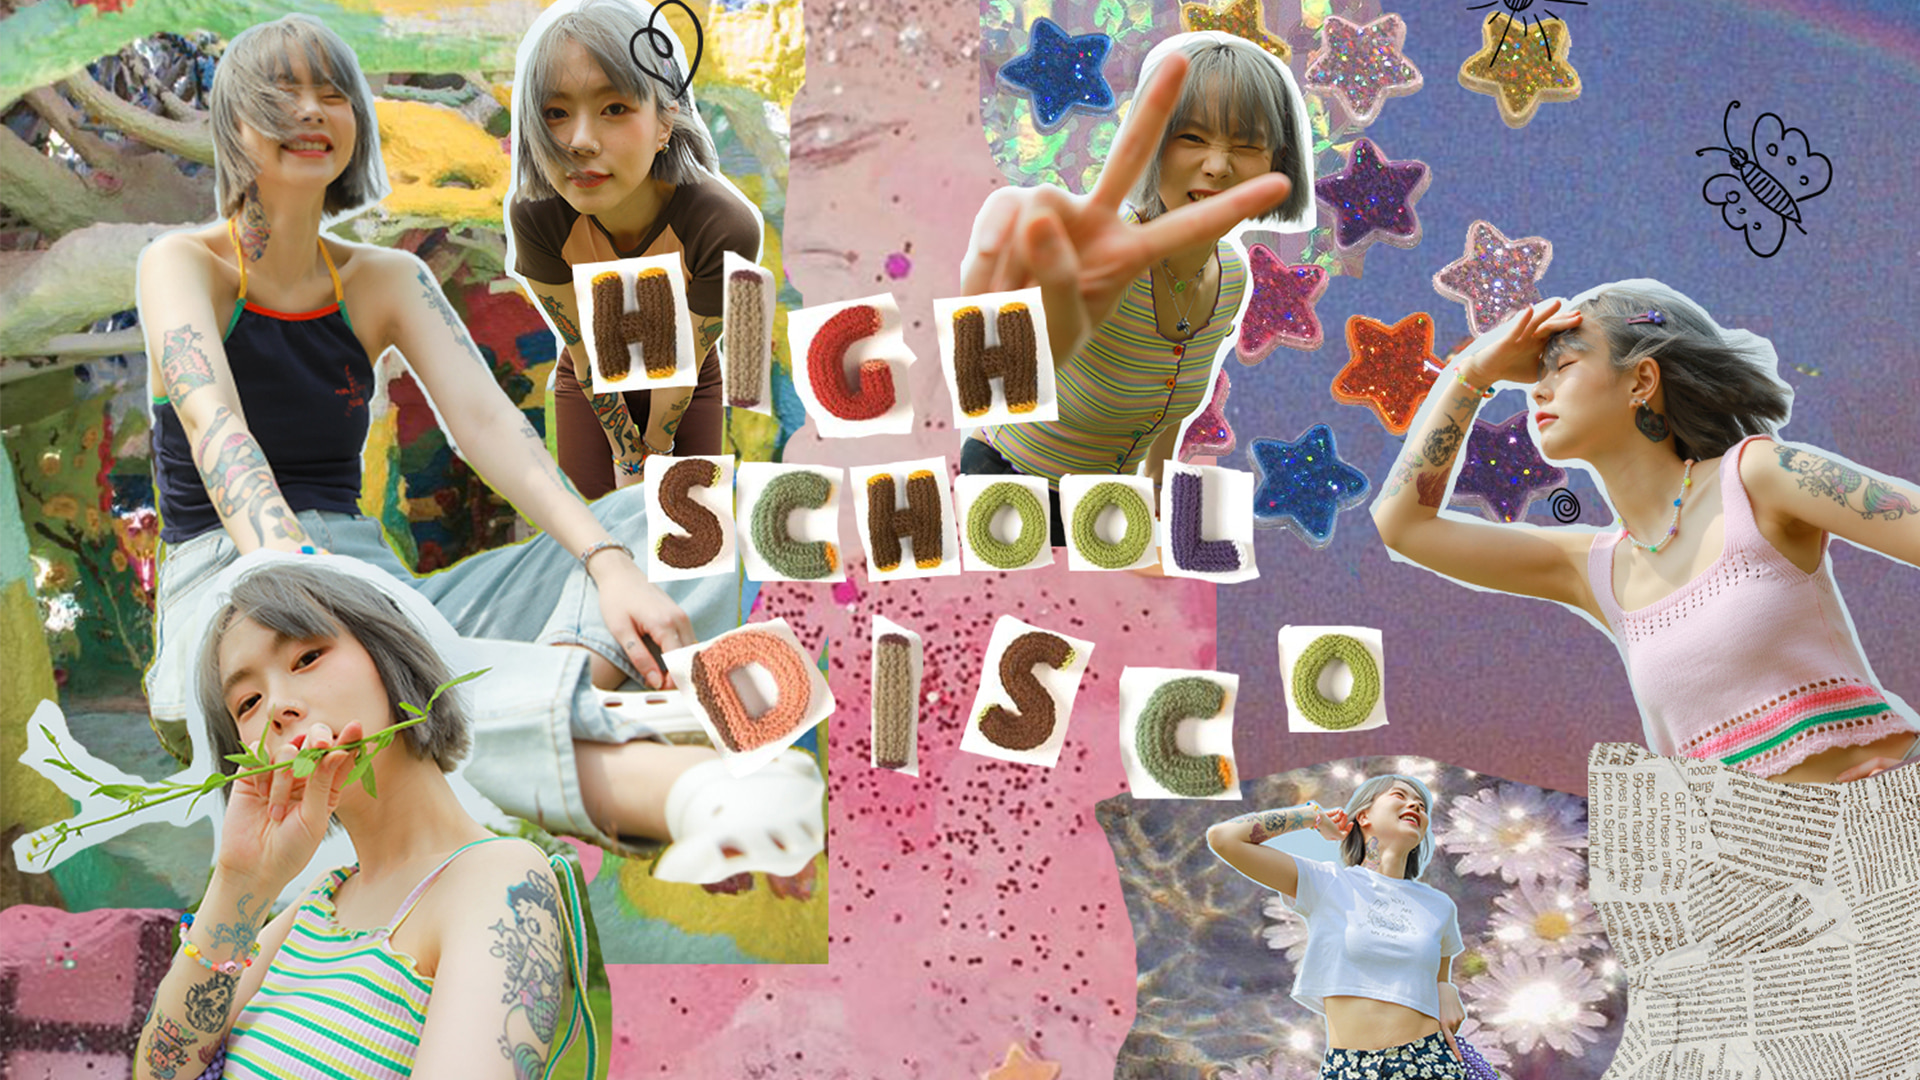 HIGHSCHOOLDISCO 2021 S/S 2st COLLECTION